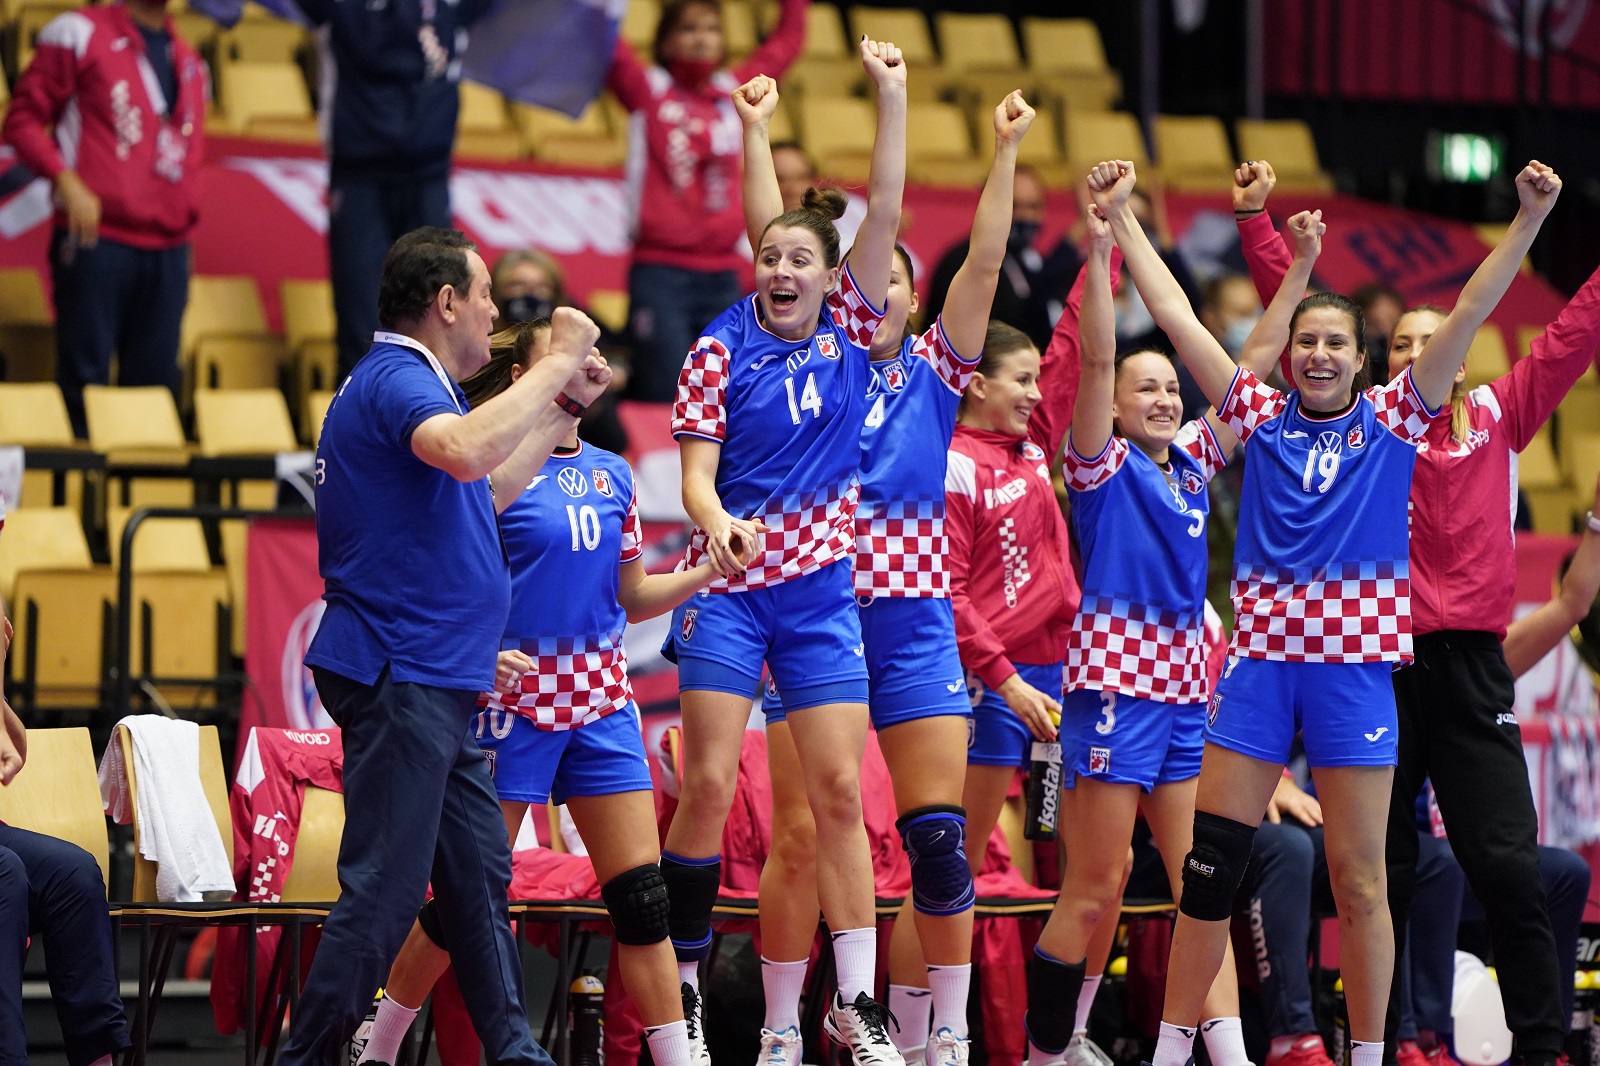 epa08896136 Coach Nenad Sostaric (L) of Croatia and his bench players celebrate during the bronze medal match between Croatia and Denmark at the EHF Euro 2020 women's European Championships in Herning, Denmark, 20 December 2020.  EPA/HENNING BAGGER  DENMARK OUT